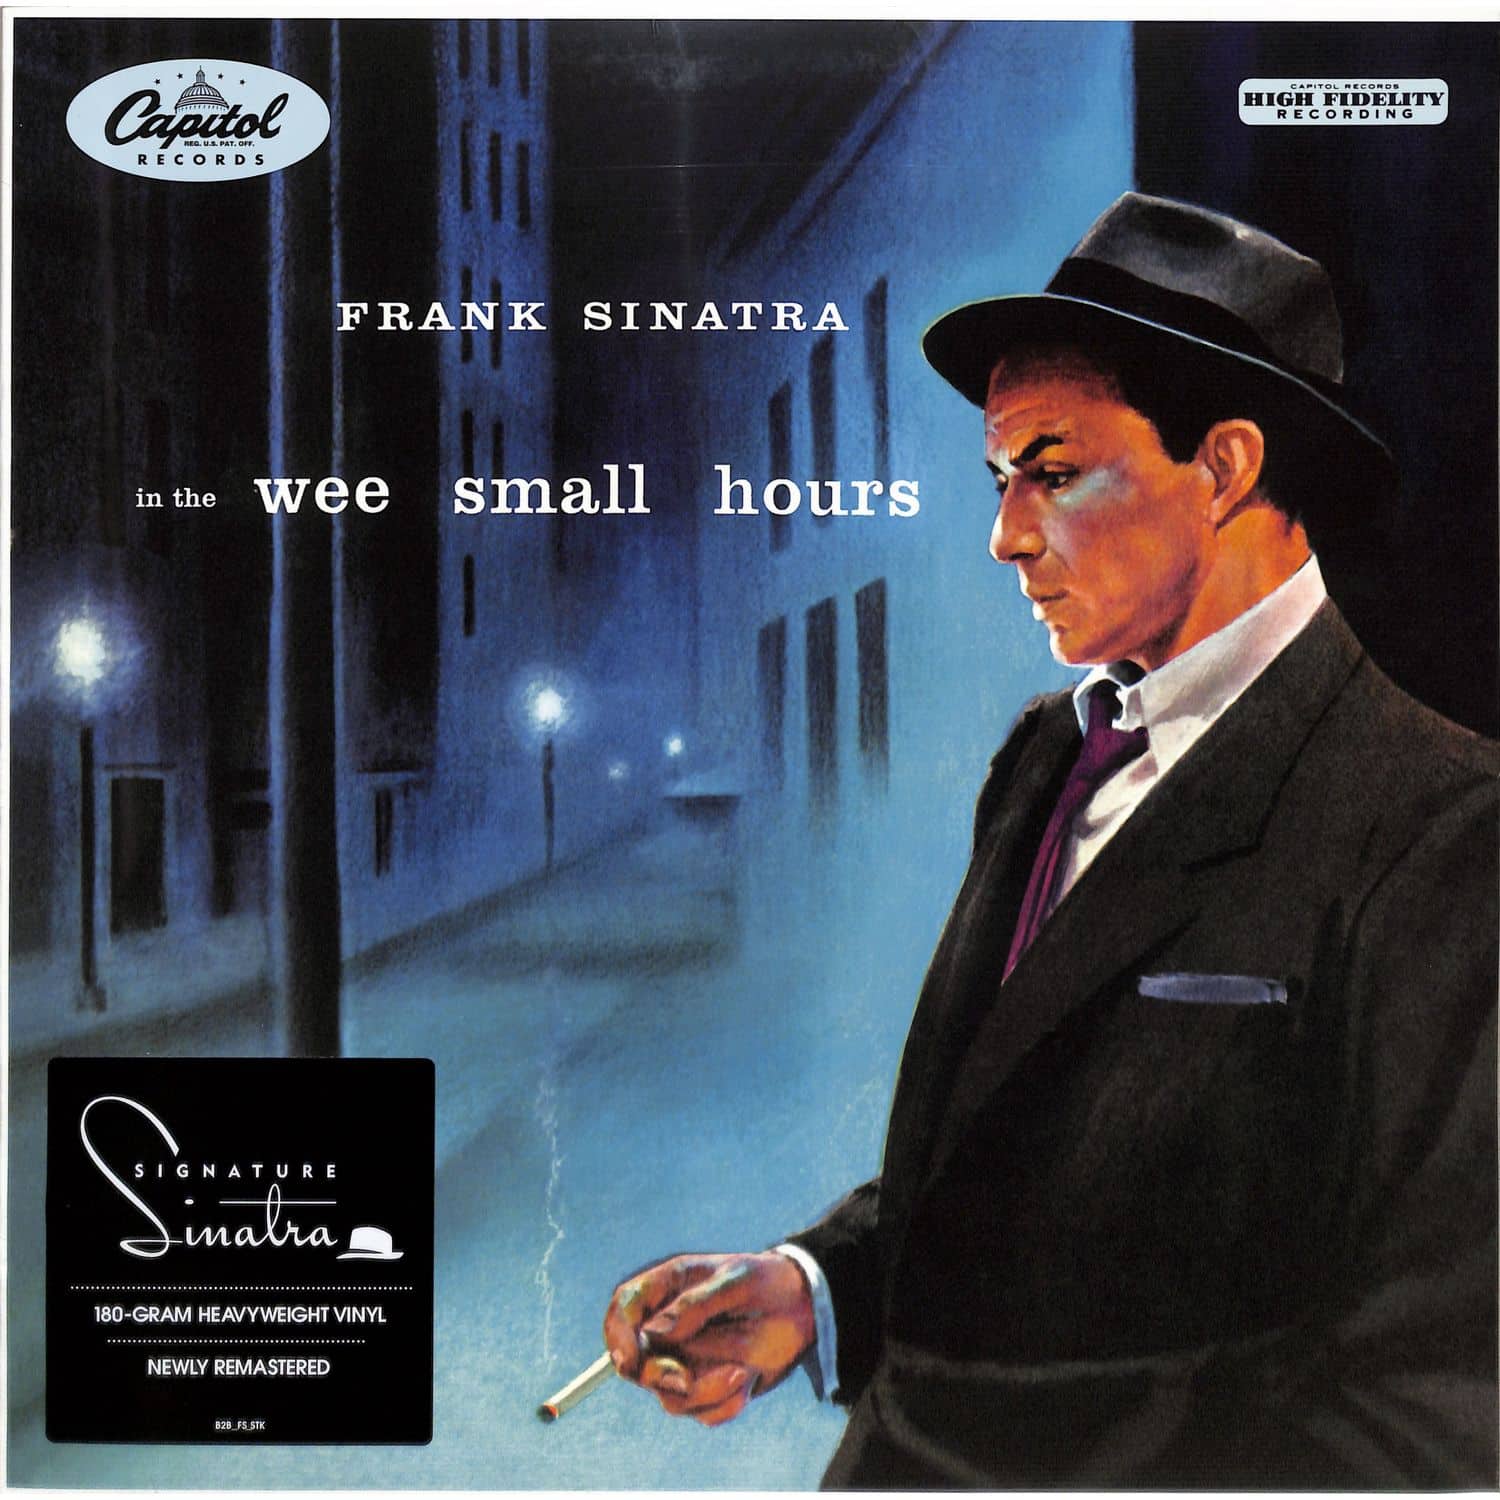 Frank Sinatra - IN THE WEE SMALL HOURS 